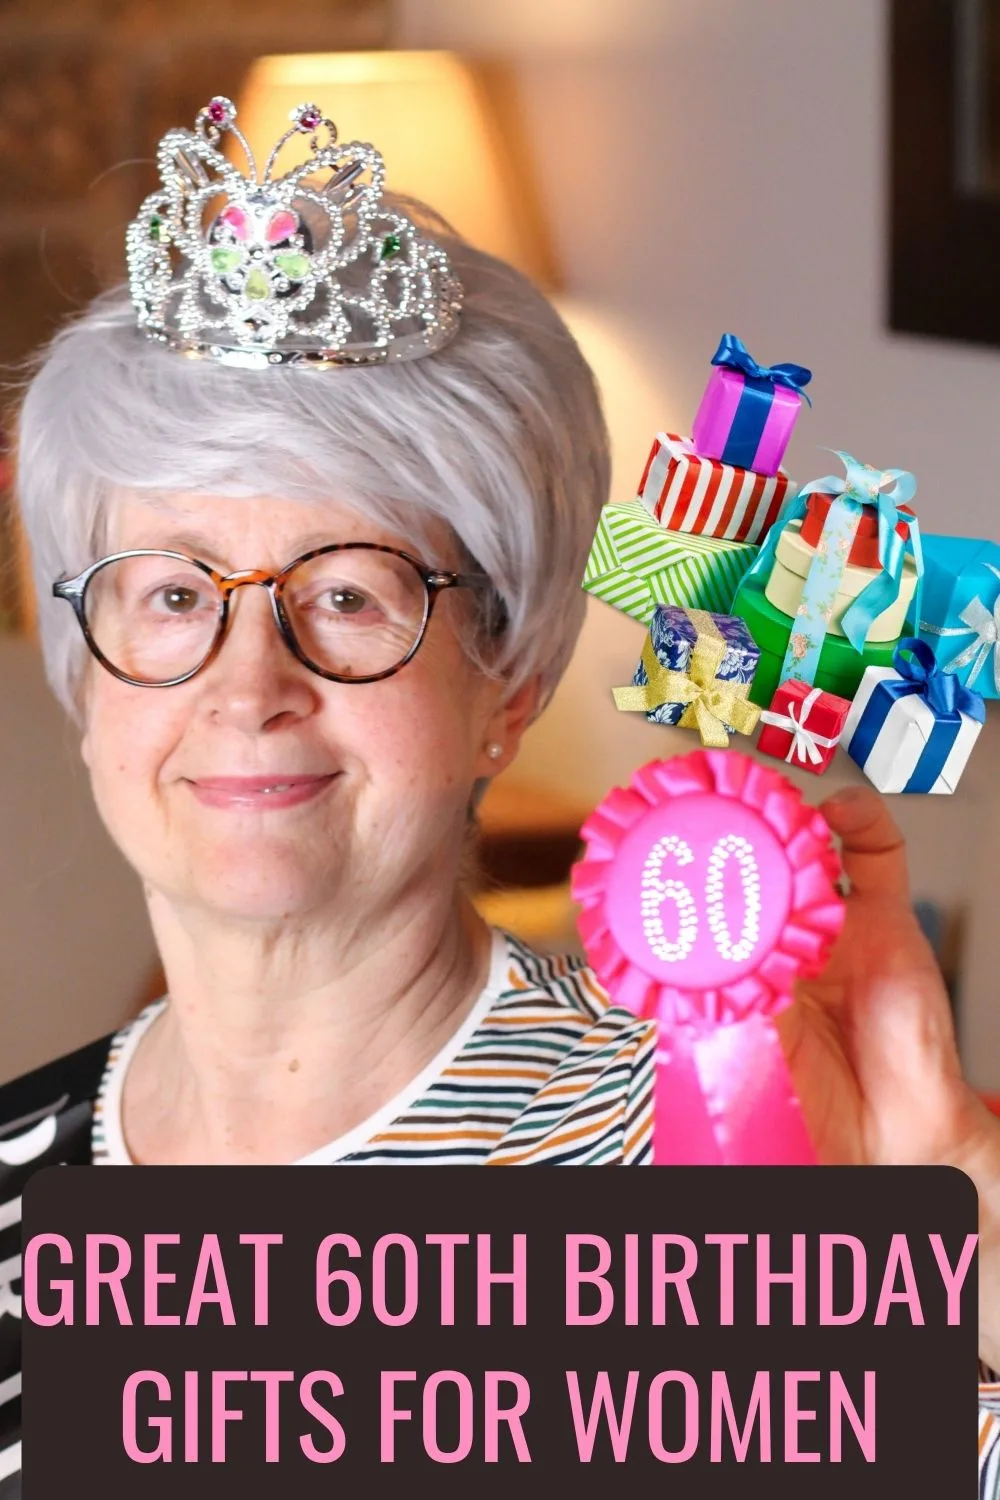 Great 60th birthday gifts for women